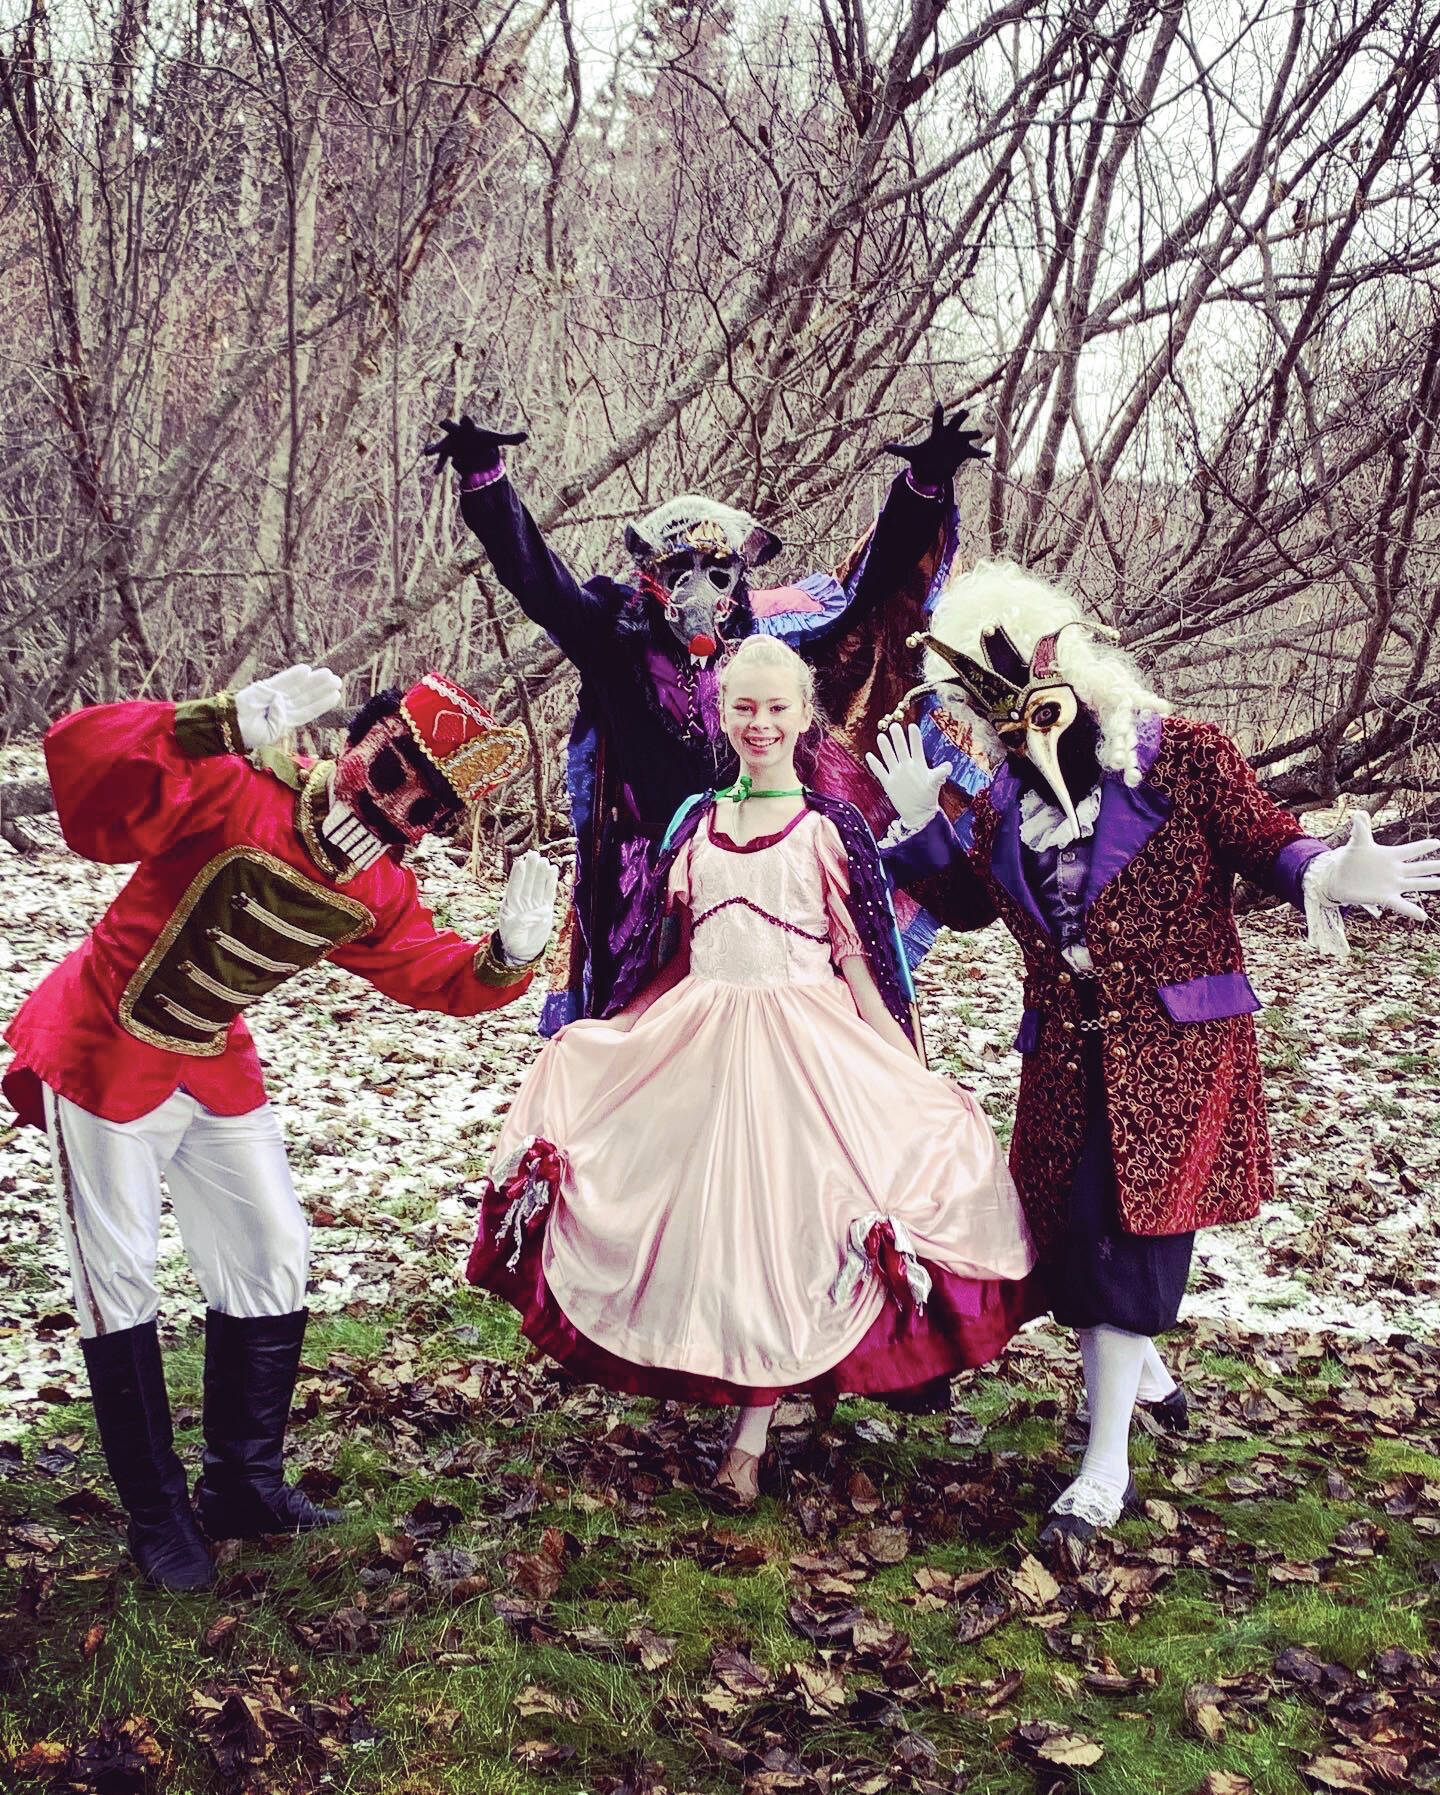 Photo courtesy Homer Nutcracker Production 
From left to right, Bryson Brewer-Dell as the Nutcracker, Liam James as the Rat King, Swift Blackstock as Clara and Aaron Walbrecher as Drosselmeyer pose for a photo on Nov. 30, 2020, for the Petit Nutcracker Ballet at the Carl Wynn Nature Center in Homer, Alaska.